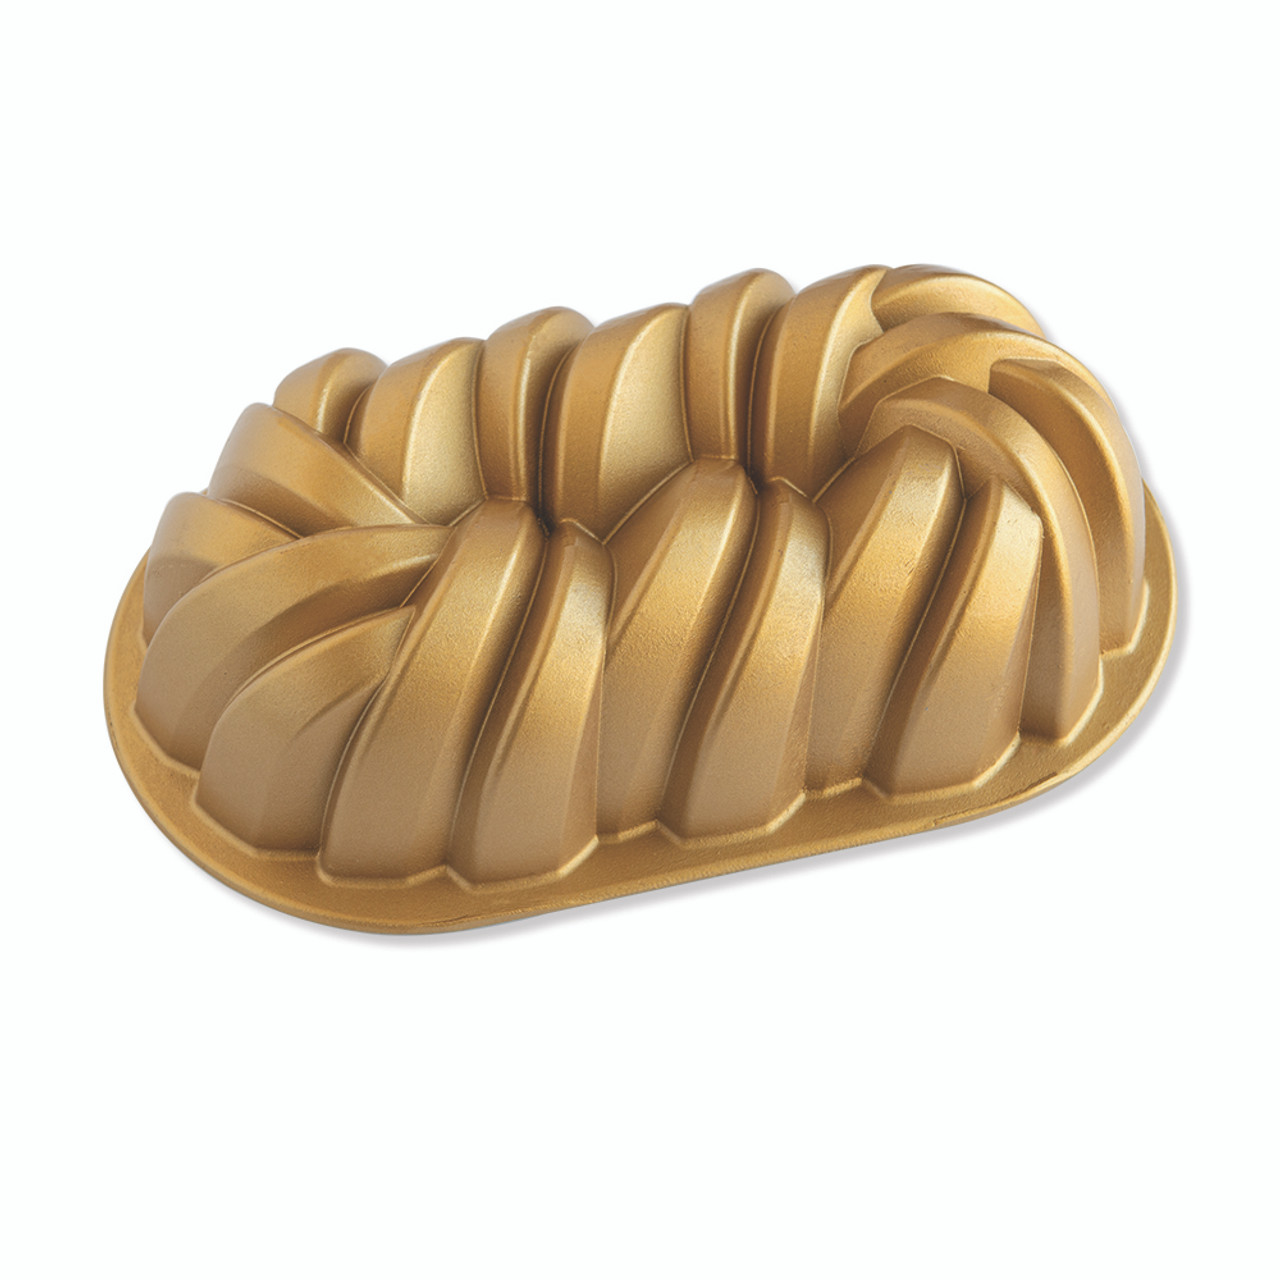  Nordic Ware Classic Fluted Loaf Pan, 6 Cup, Gold: Home